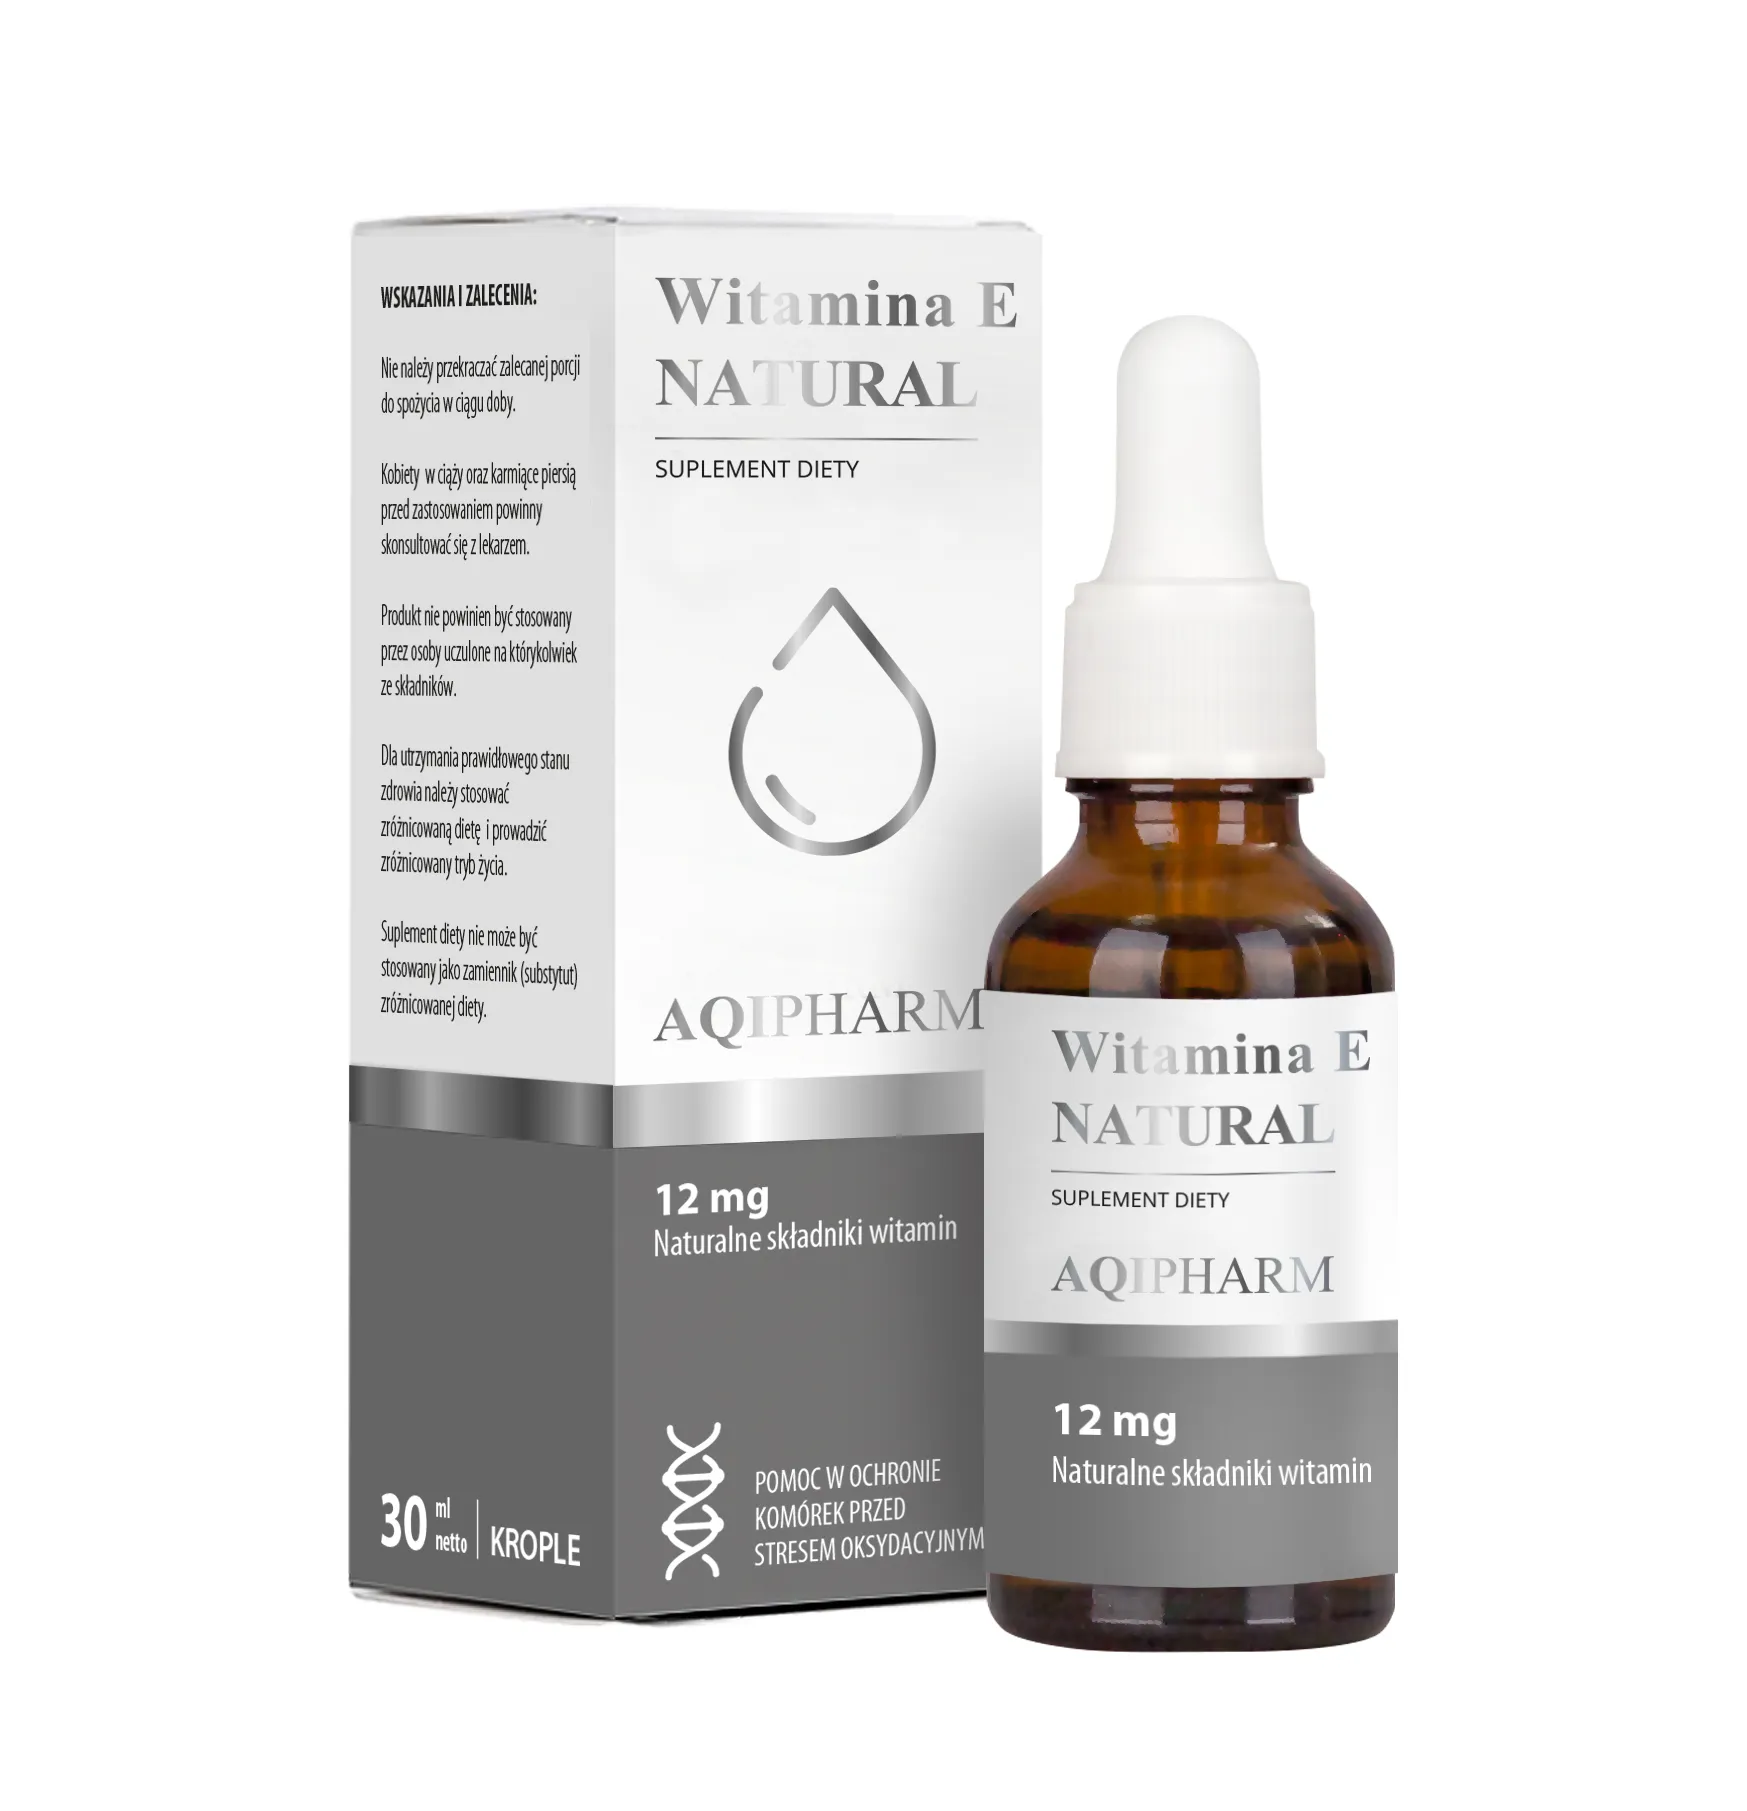 Witamina E Natural, suplement diety, 12 mg, 30 ml, krople